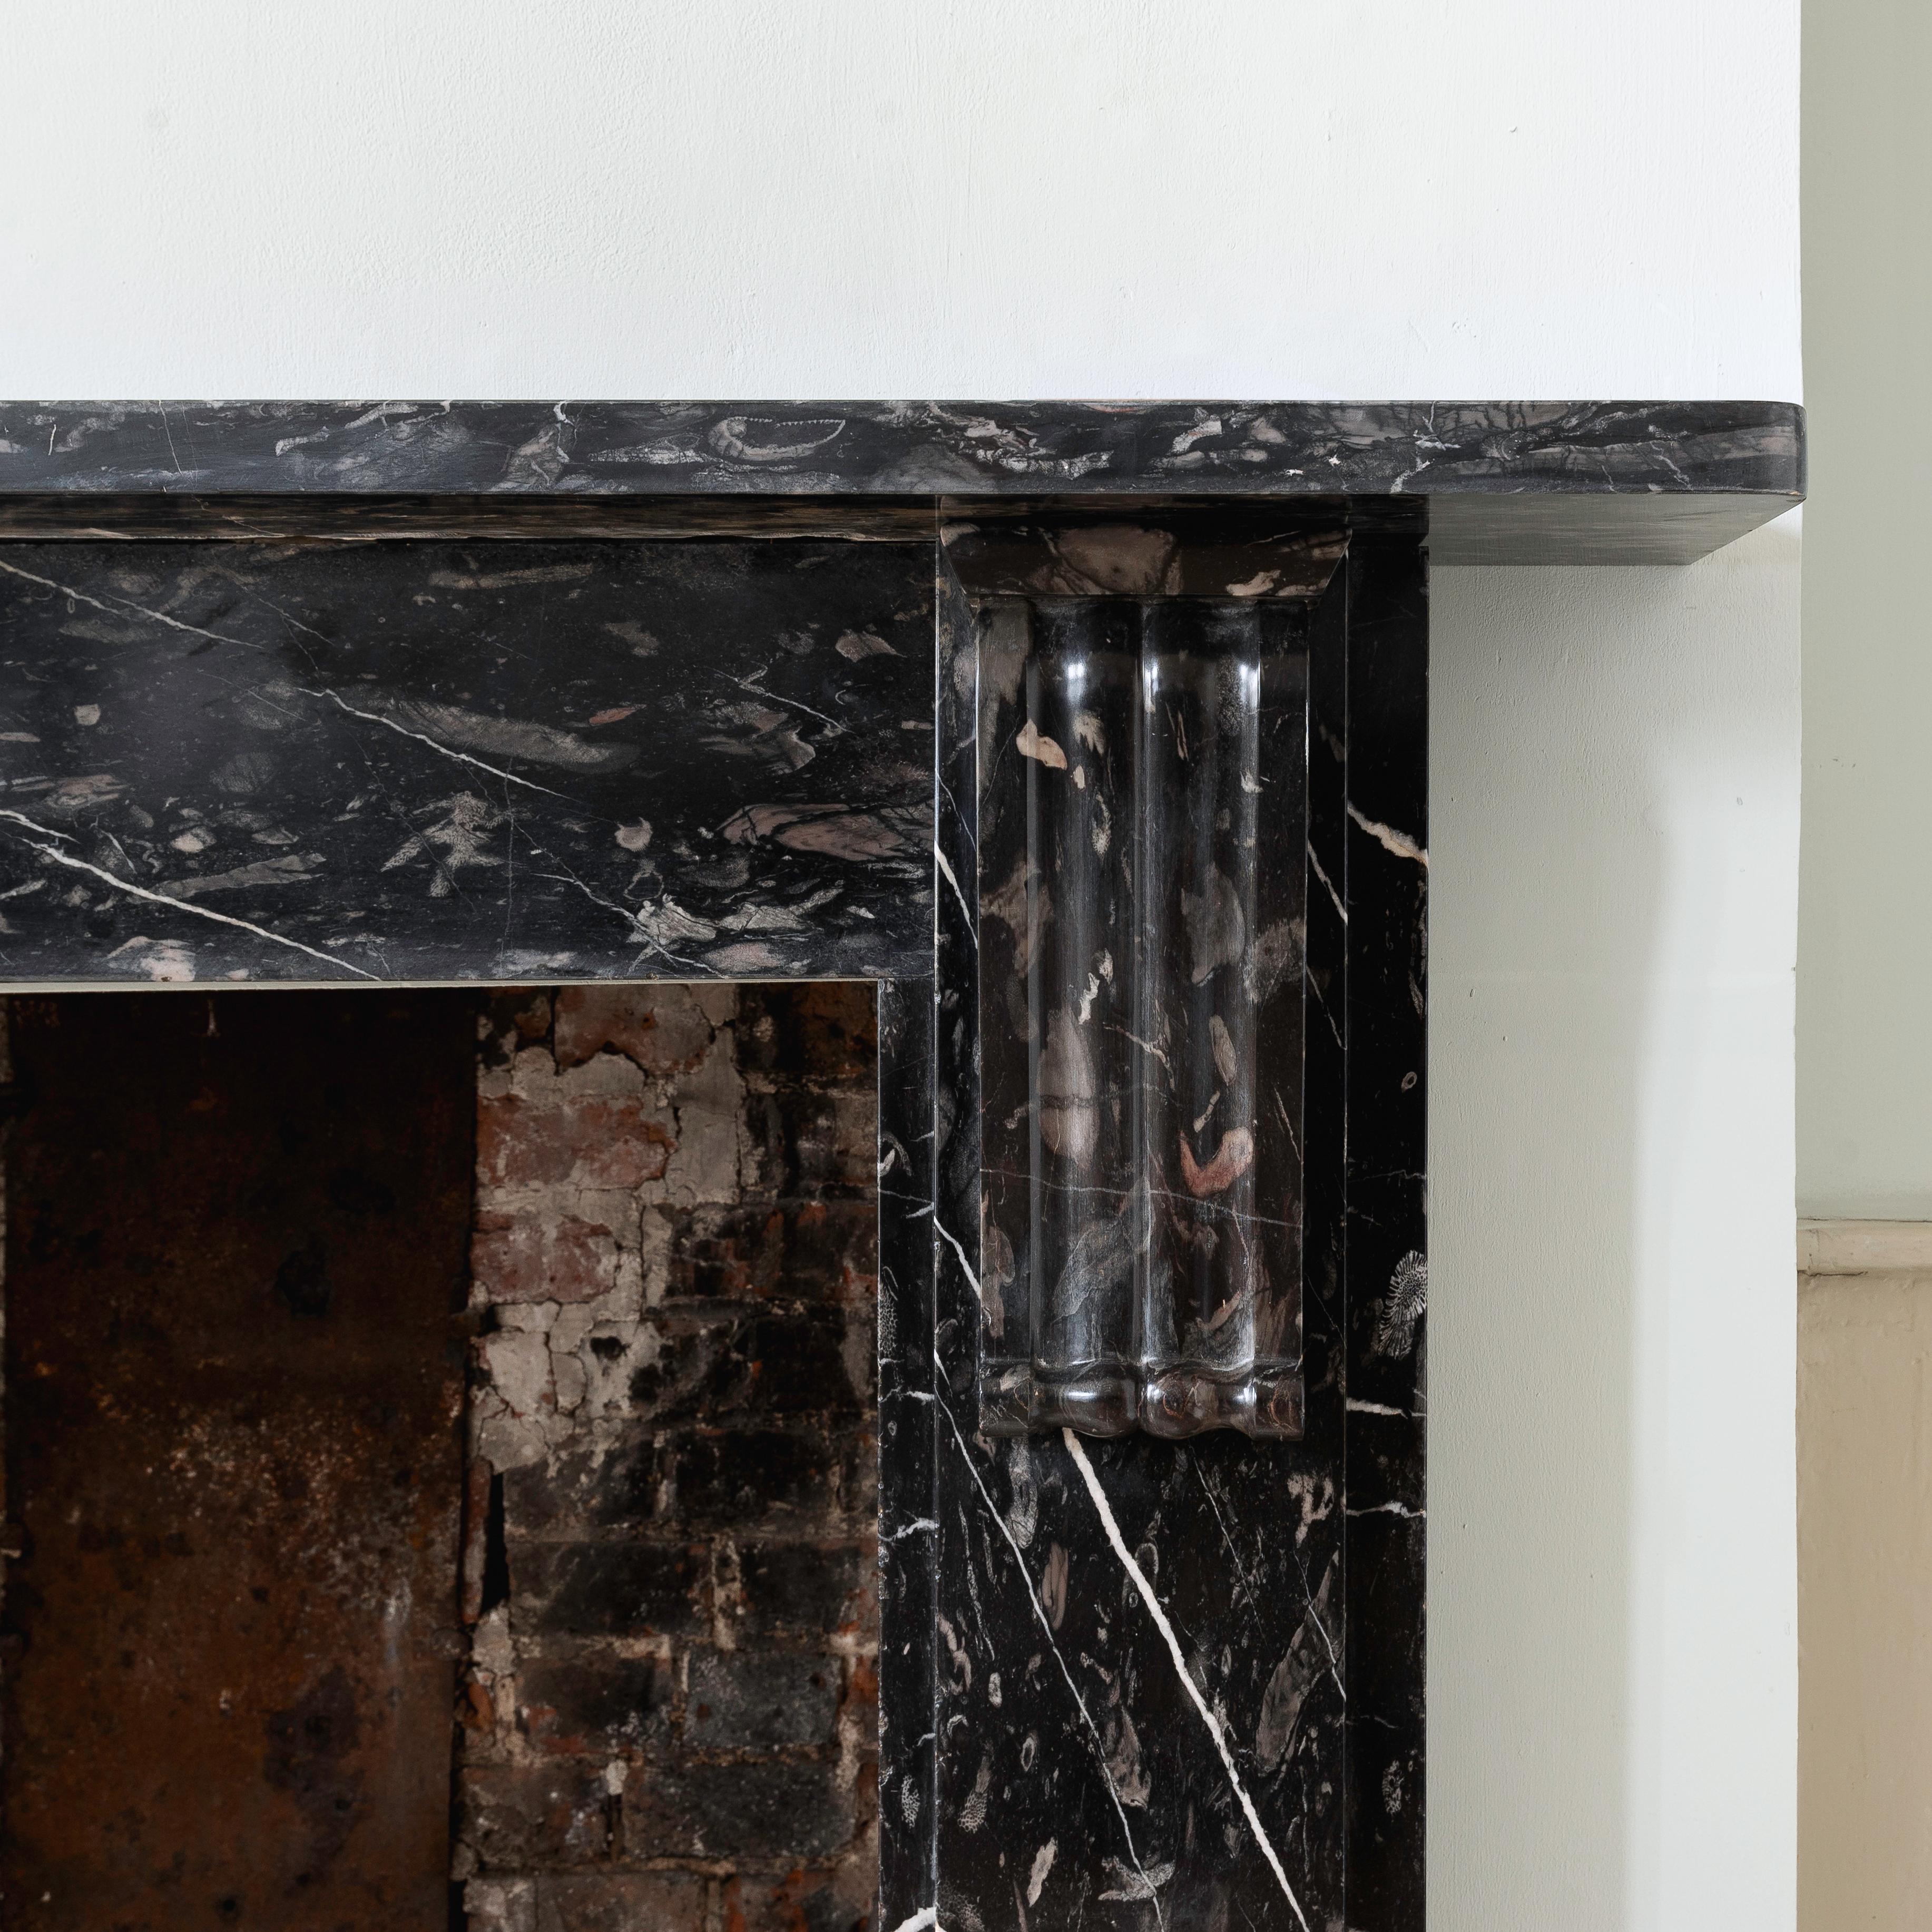 An elegant nineteenth century English fossiliferous chimneypiece in Plymouth Black limestone, of simple form with elongated corbels, carved in native limestone from the Radstock/Pomphlett mines of Plymouth, with an unusual abundance of